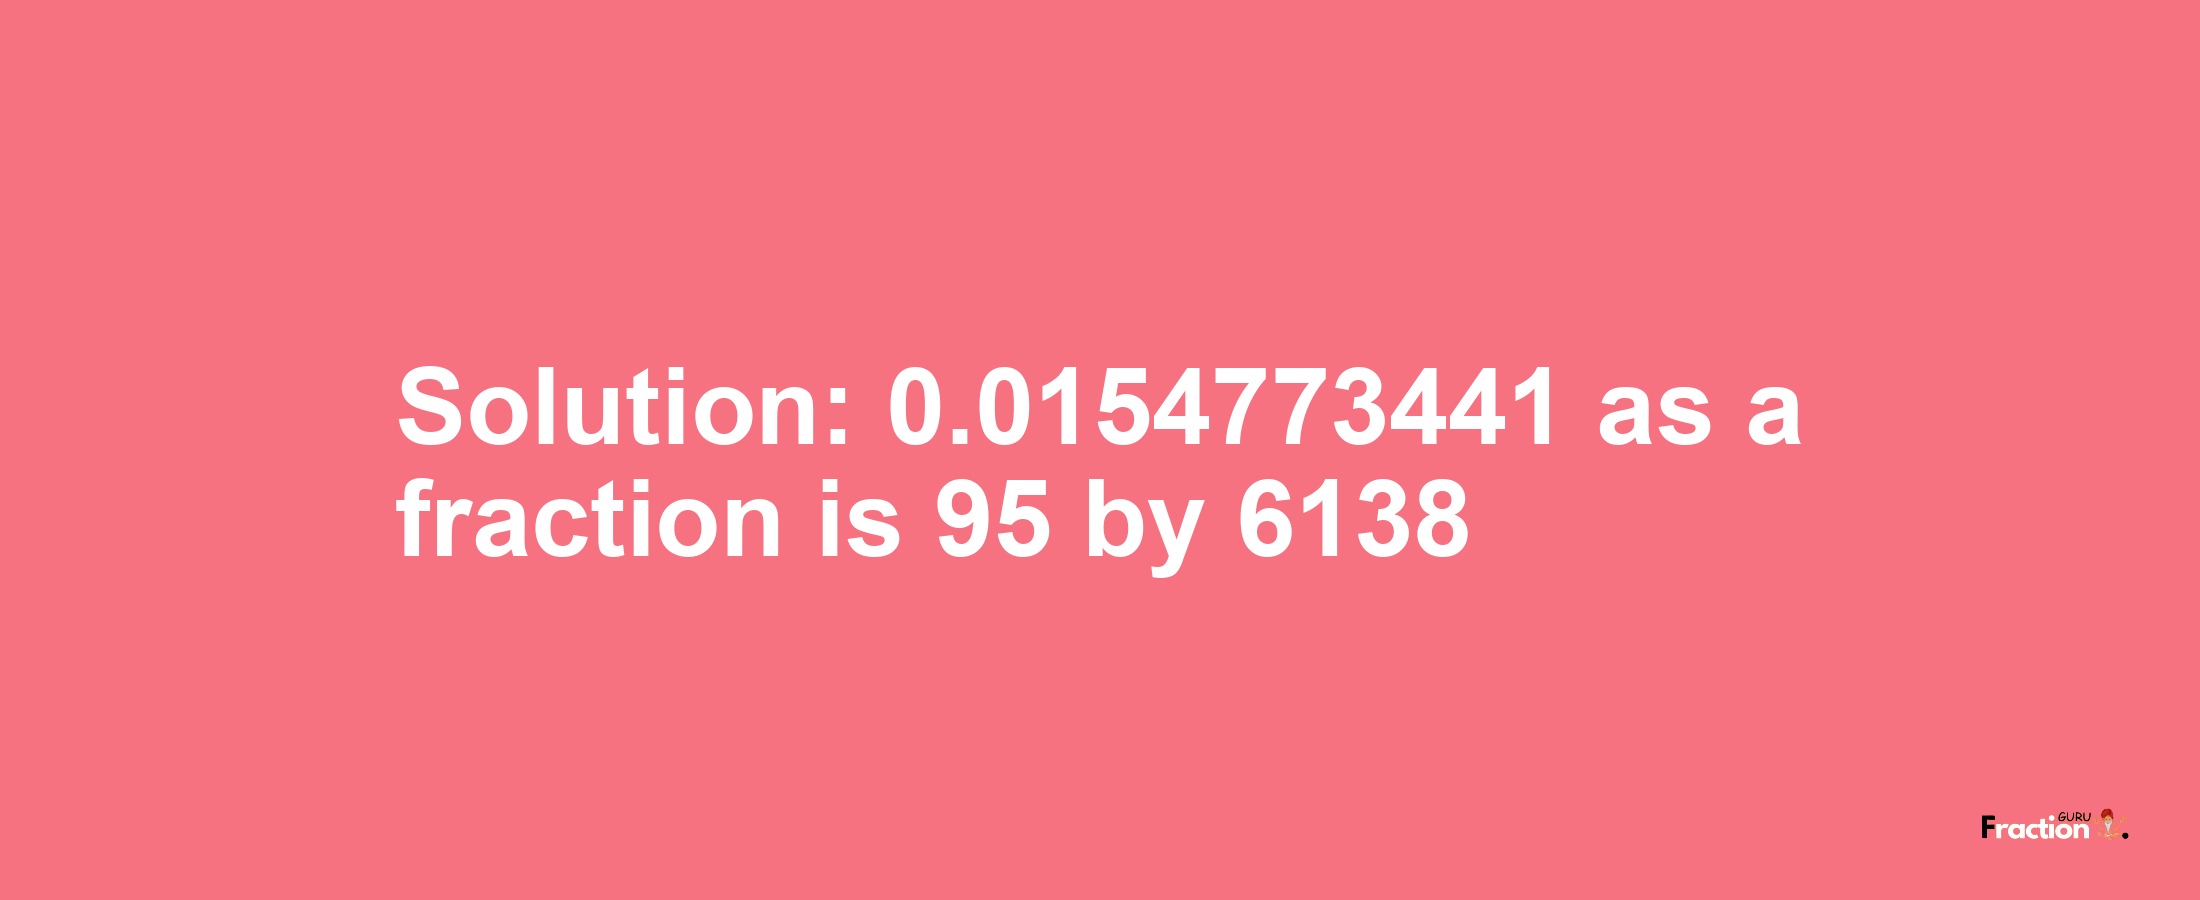 Solution:0.0154773441 as a fraction is 95/6138